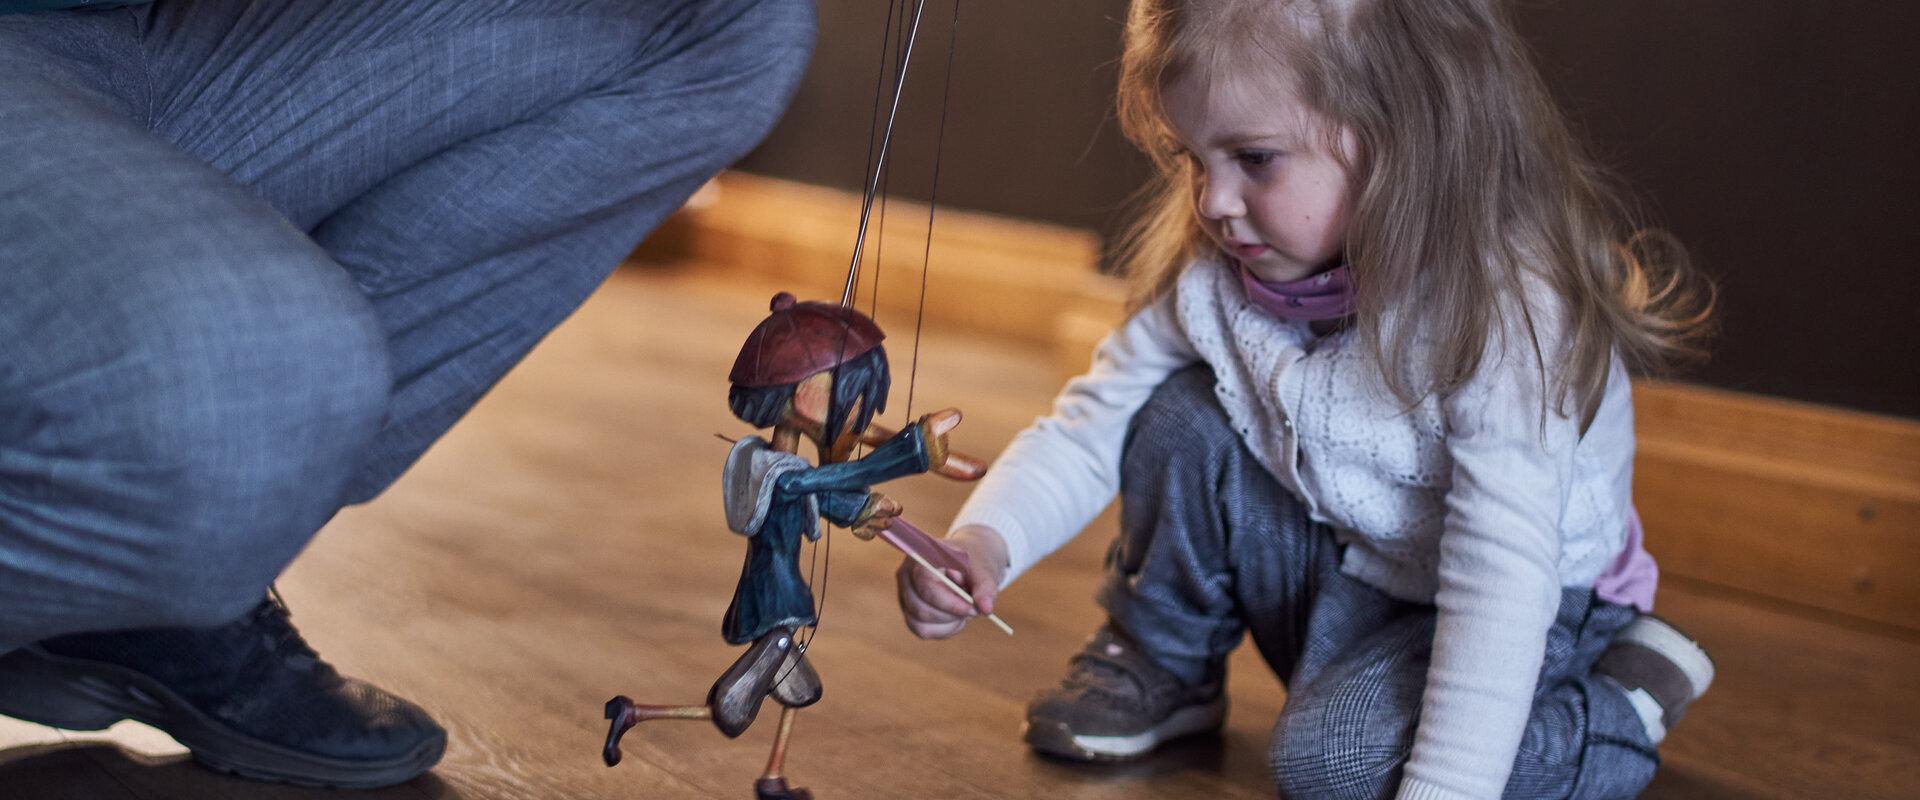 Guided tours in the Museum of Puppetry Arts